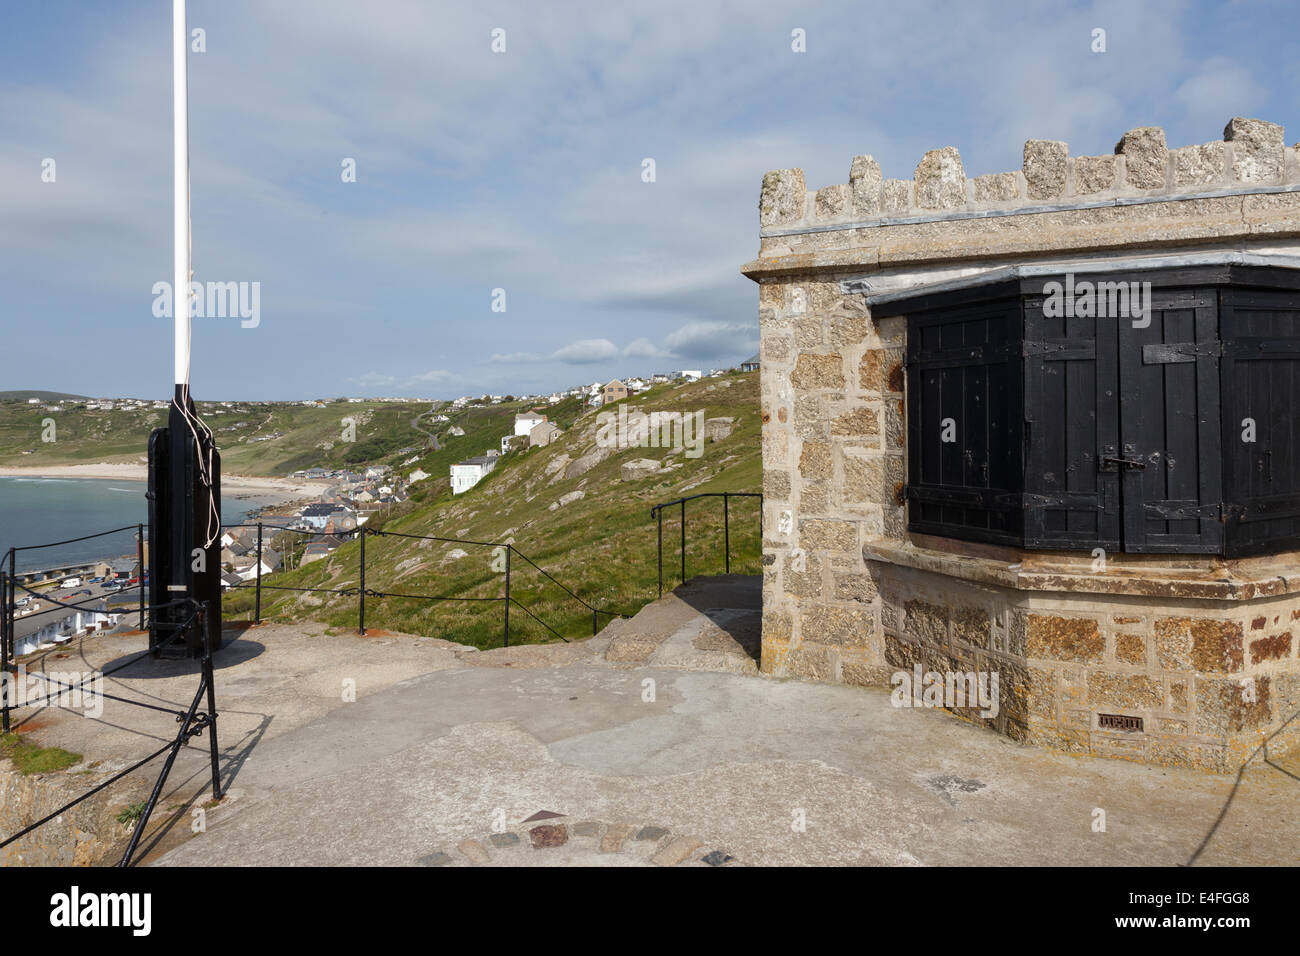 I guardacoste look out capanno vicino a mayon zona scogliera lands end Cornwall Inghilterra Foto Stock